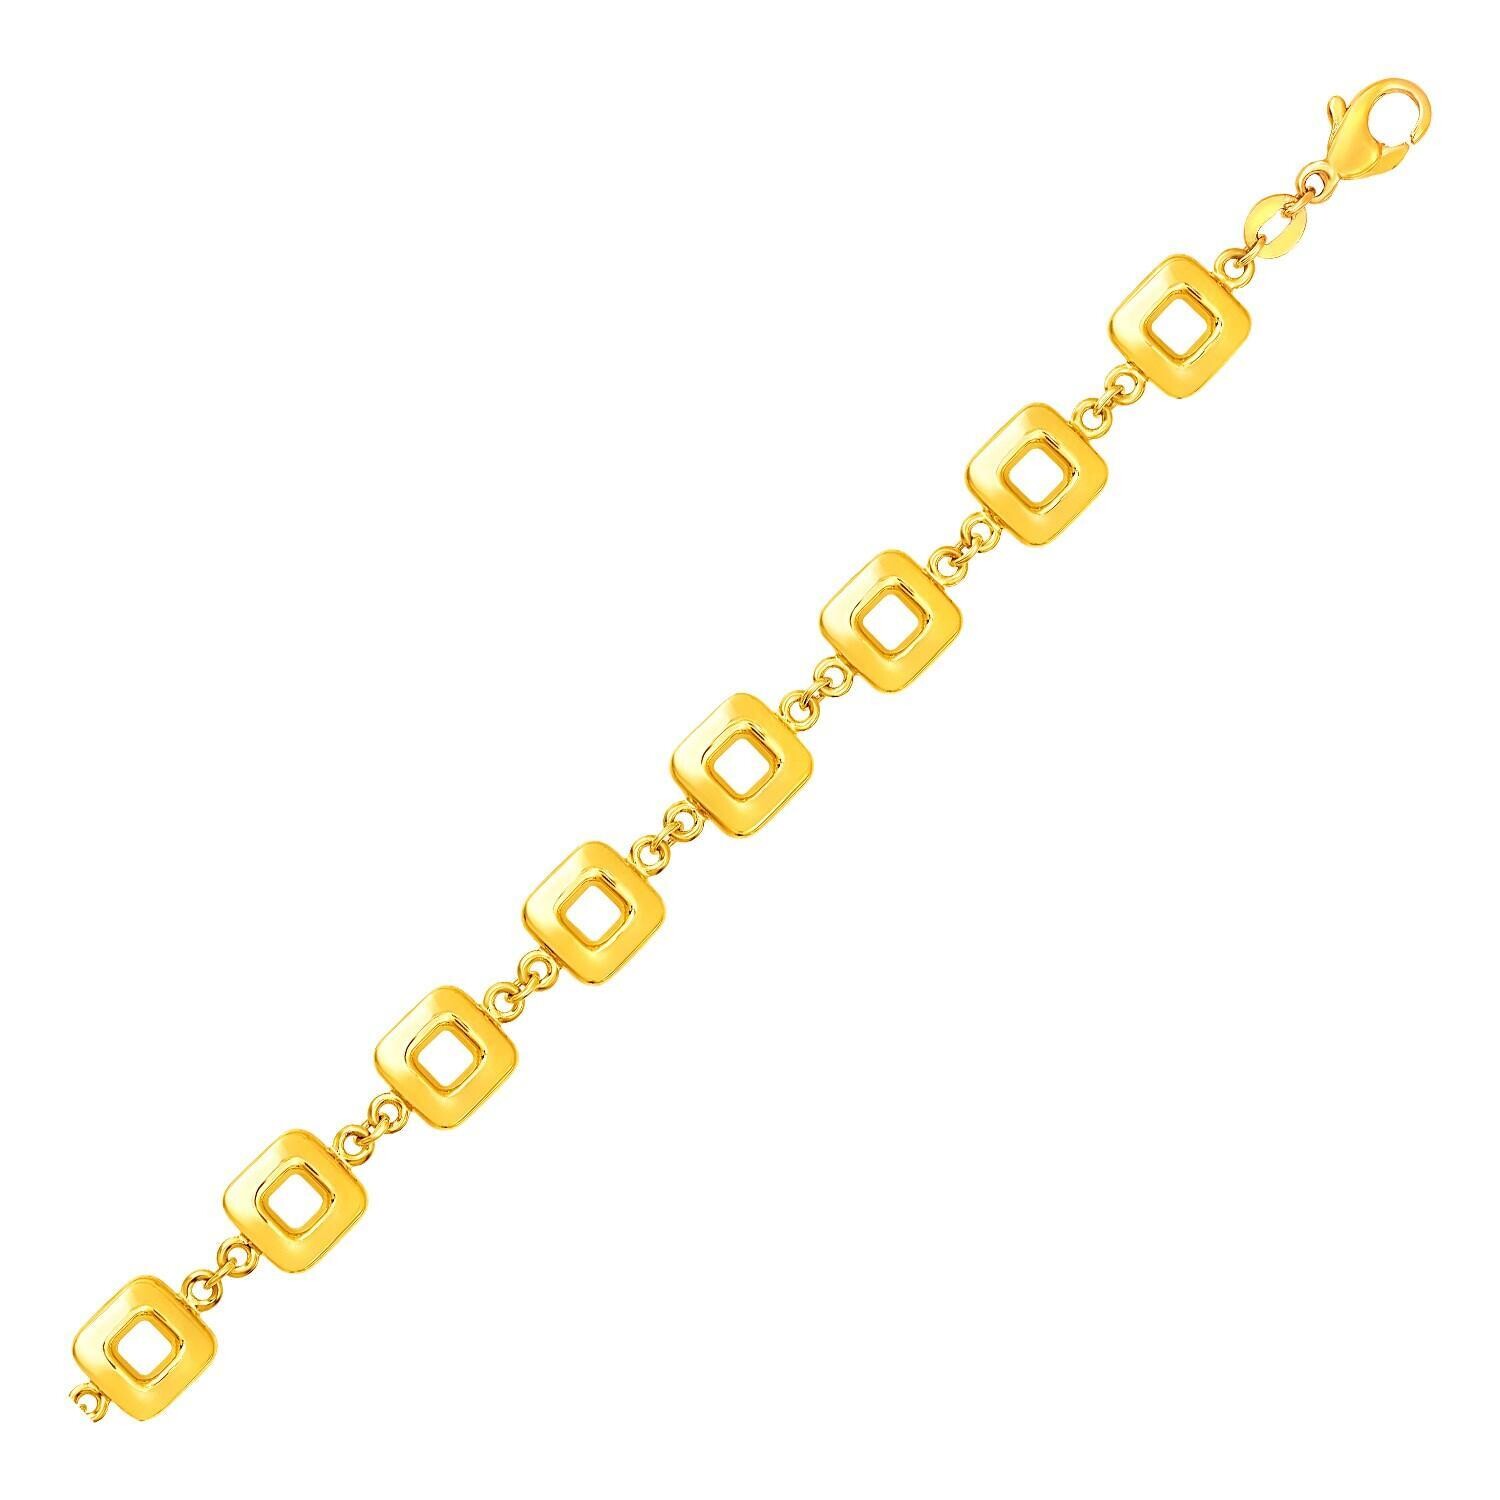 Bracelet with Shiny Square Links in 14k Yellow Gold